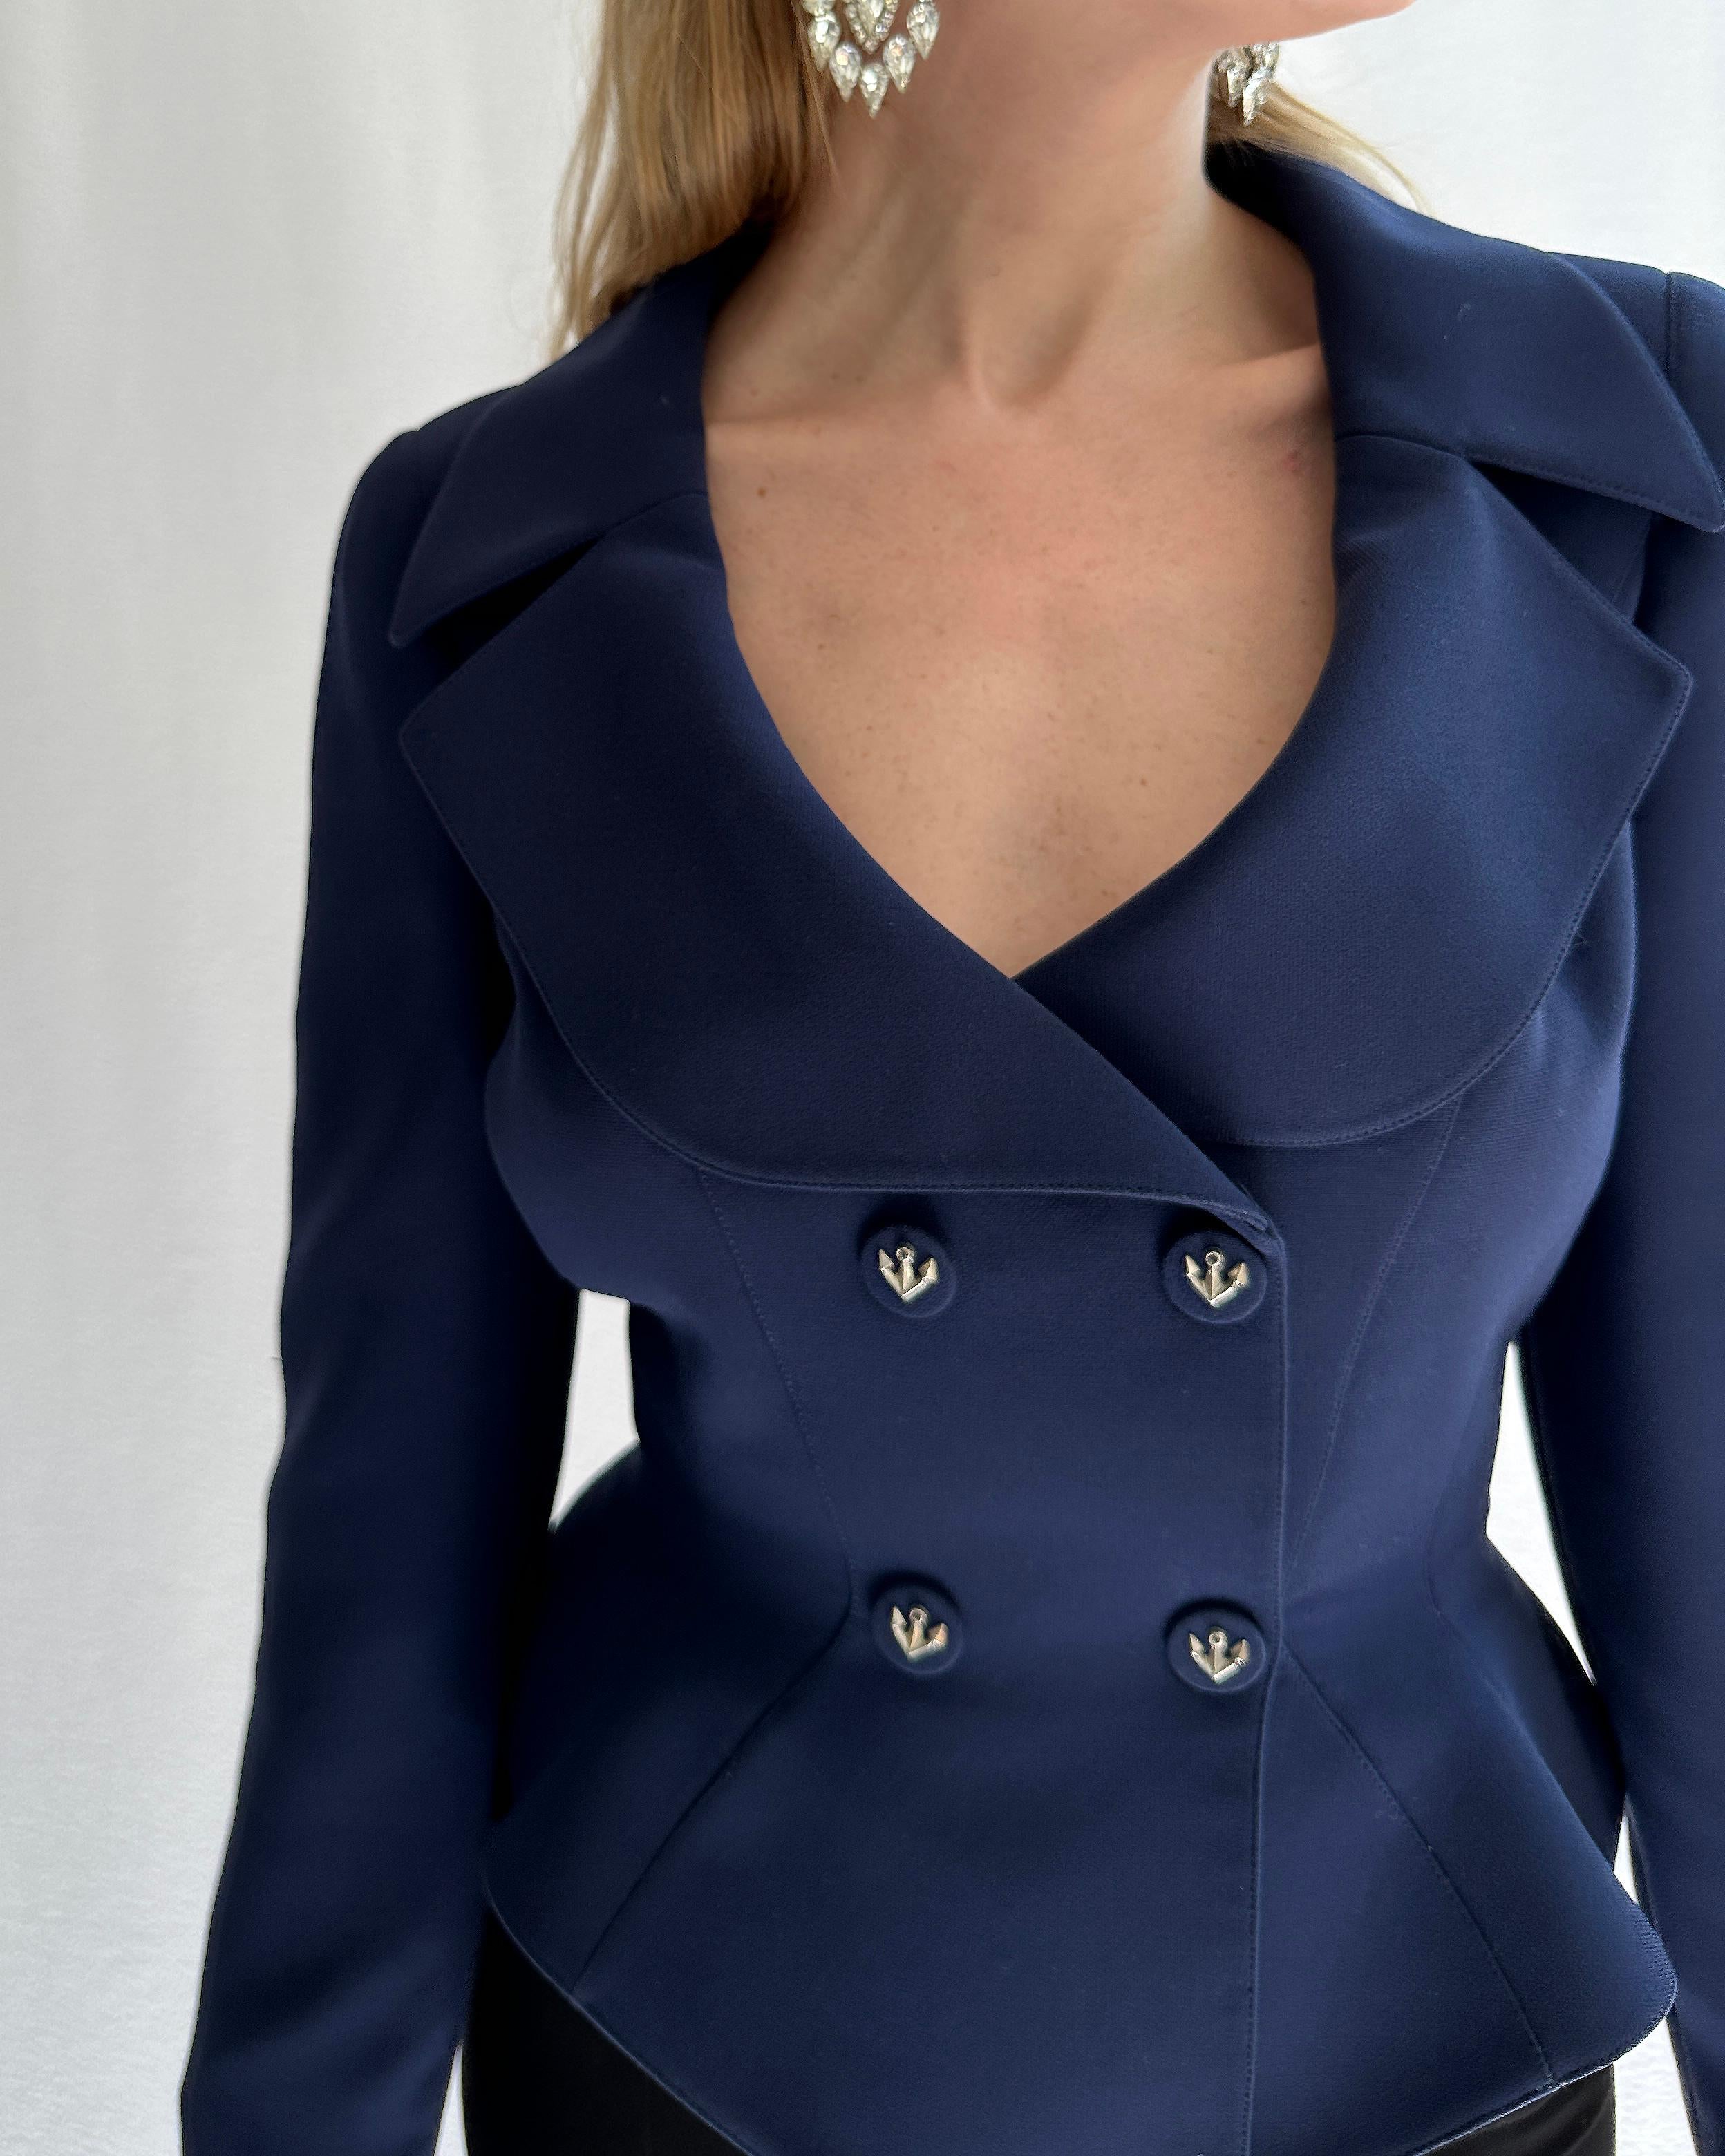 This classic Thierry Mugler blazer is a seriously timeless investment, with so many signature Mugler details making it a highly collectible piece: the exaggerated nipped waist with flared hips, the dramatic lapels, and the anchor details. Mugler